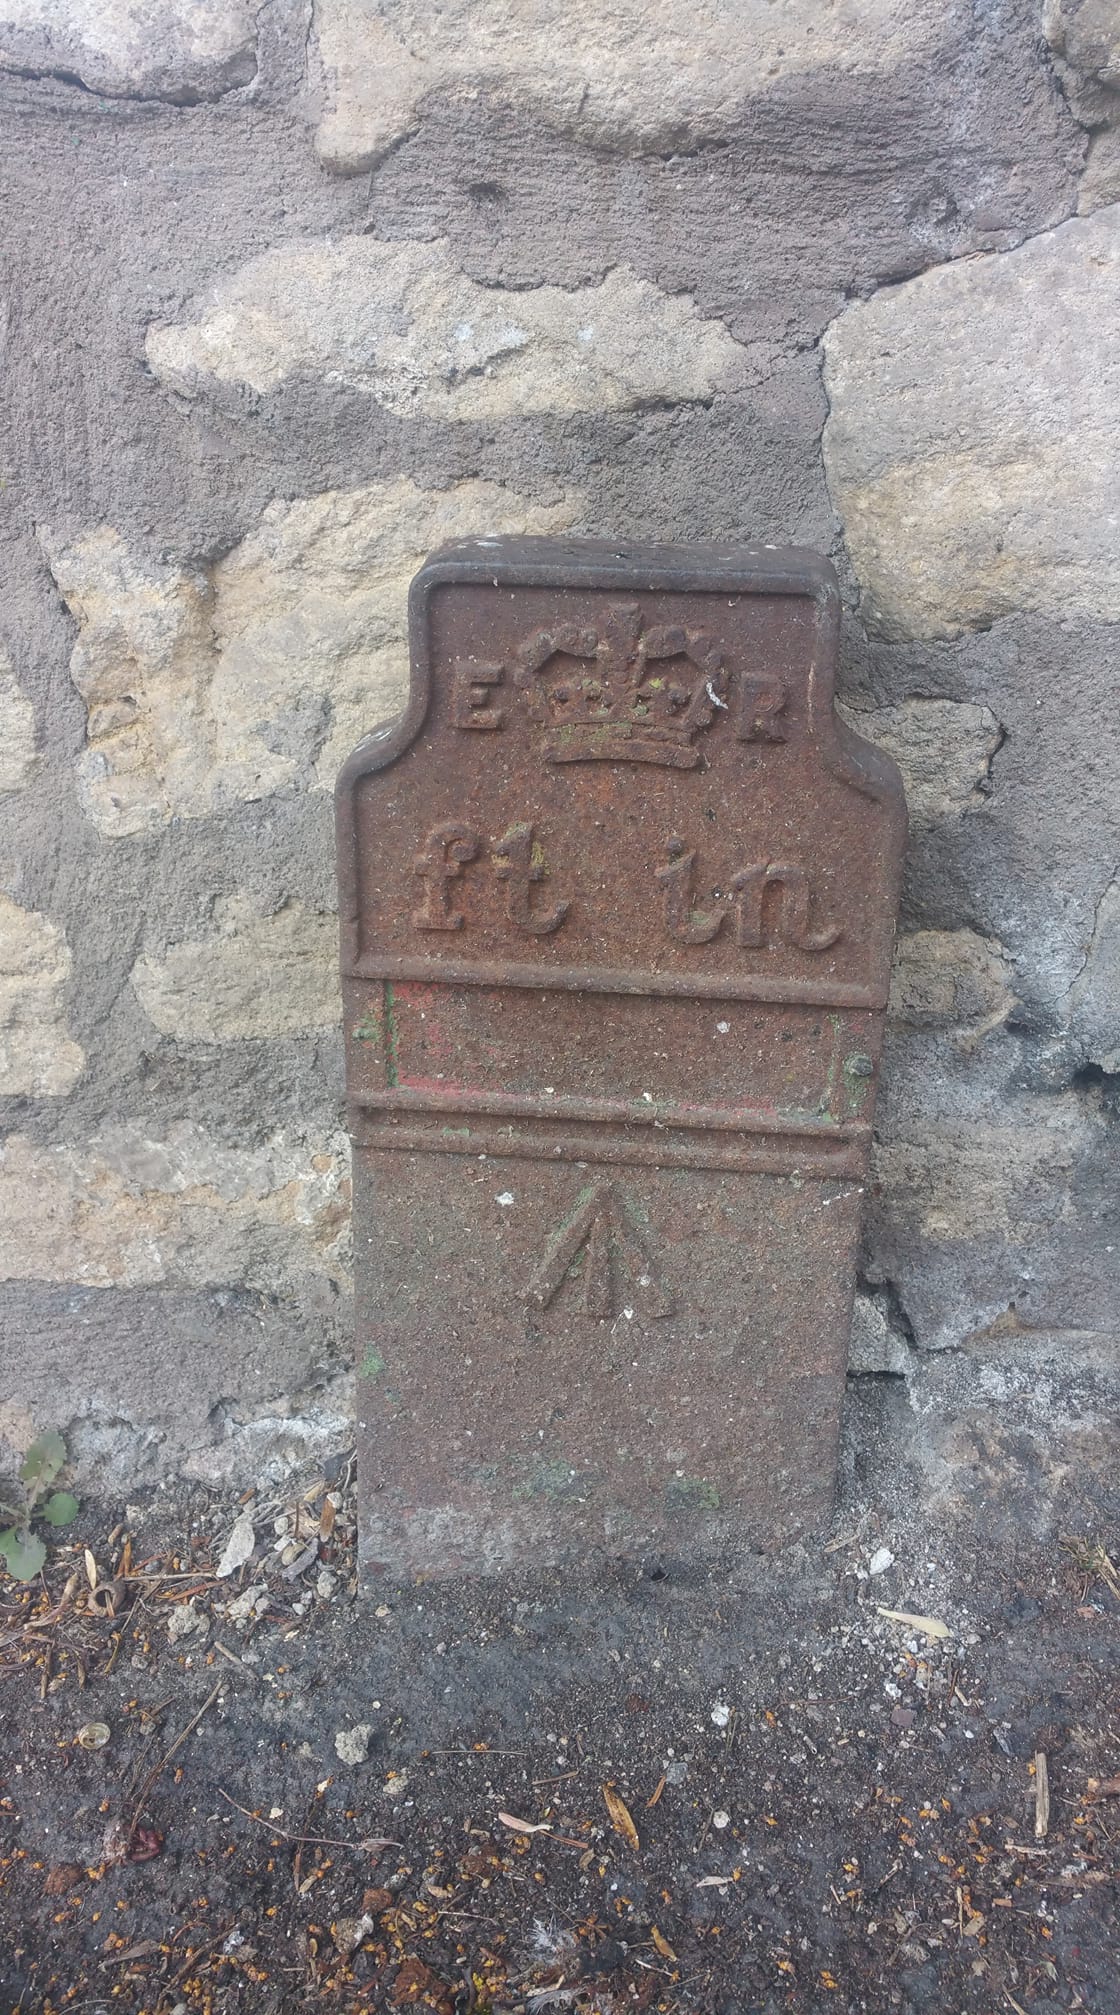 Telegraph cable marker post at 156 London Road West, Batheaston by Spike Johnson 